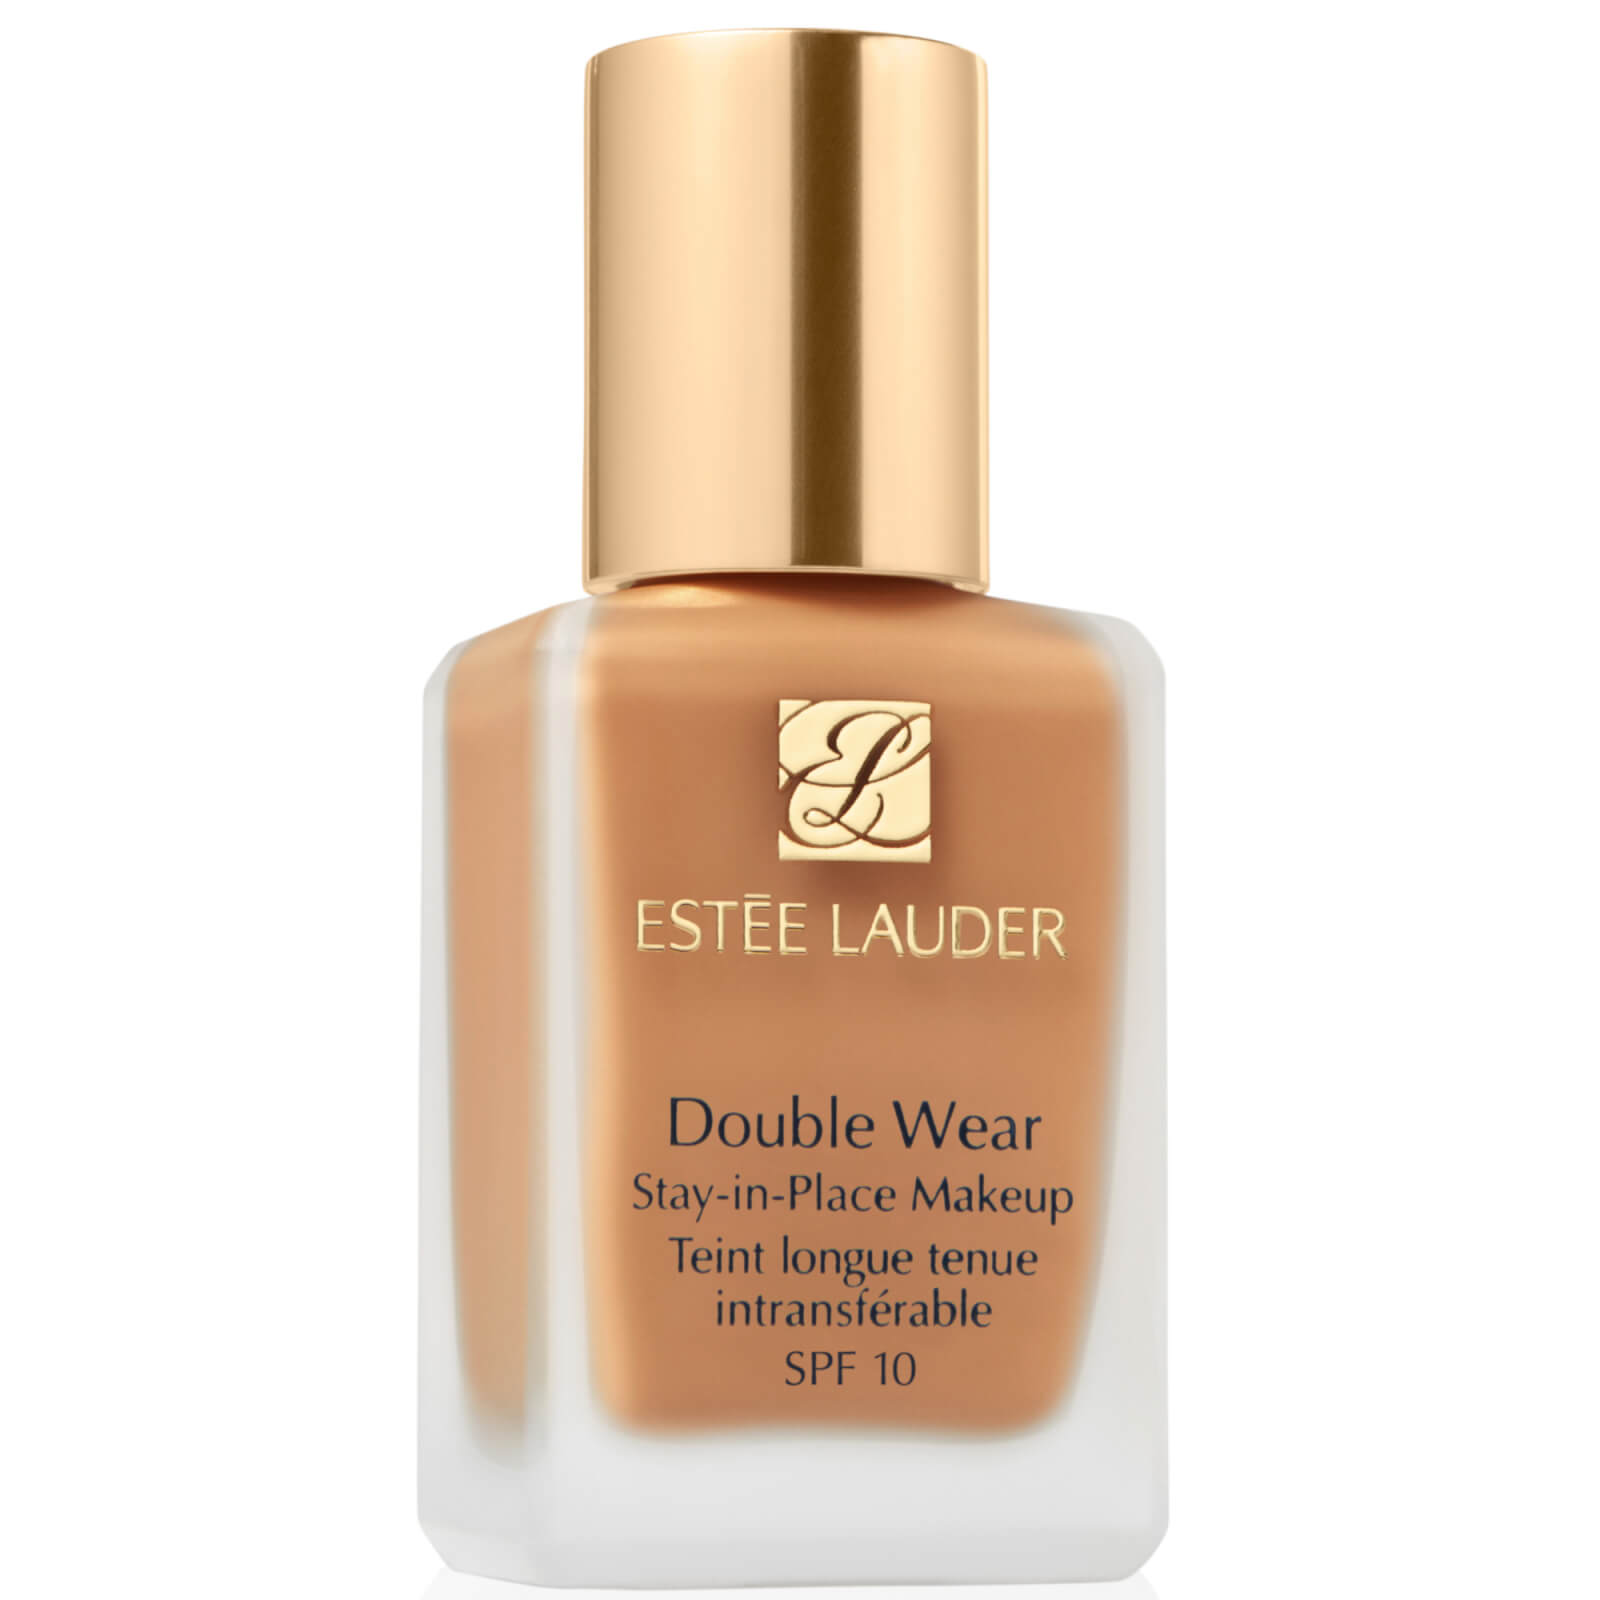 Estee Lauder Double Wear Stay-in-Place Makeup 30ml (Various Shades) - 1W2 Sand